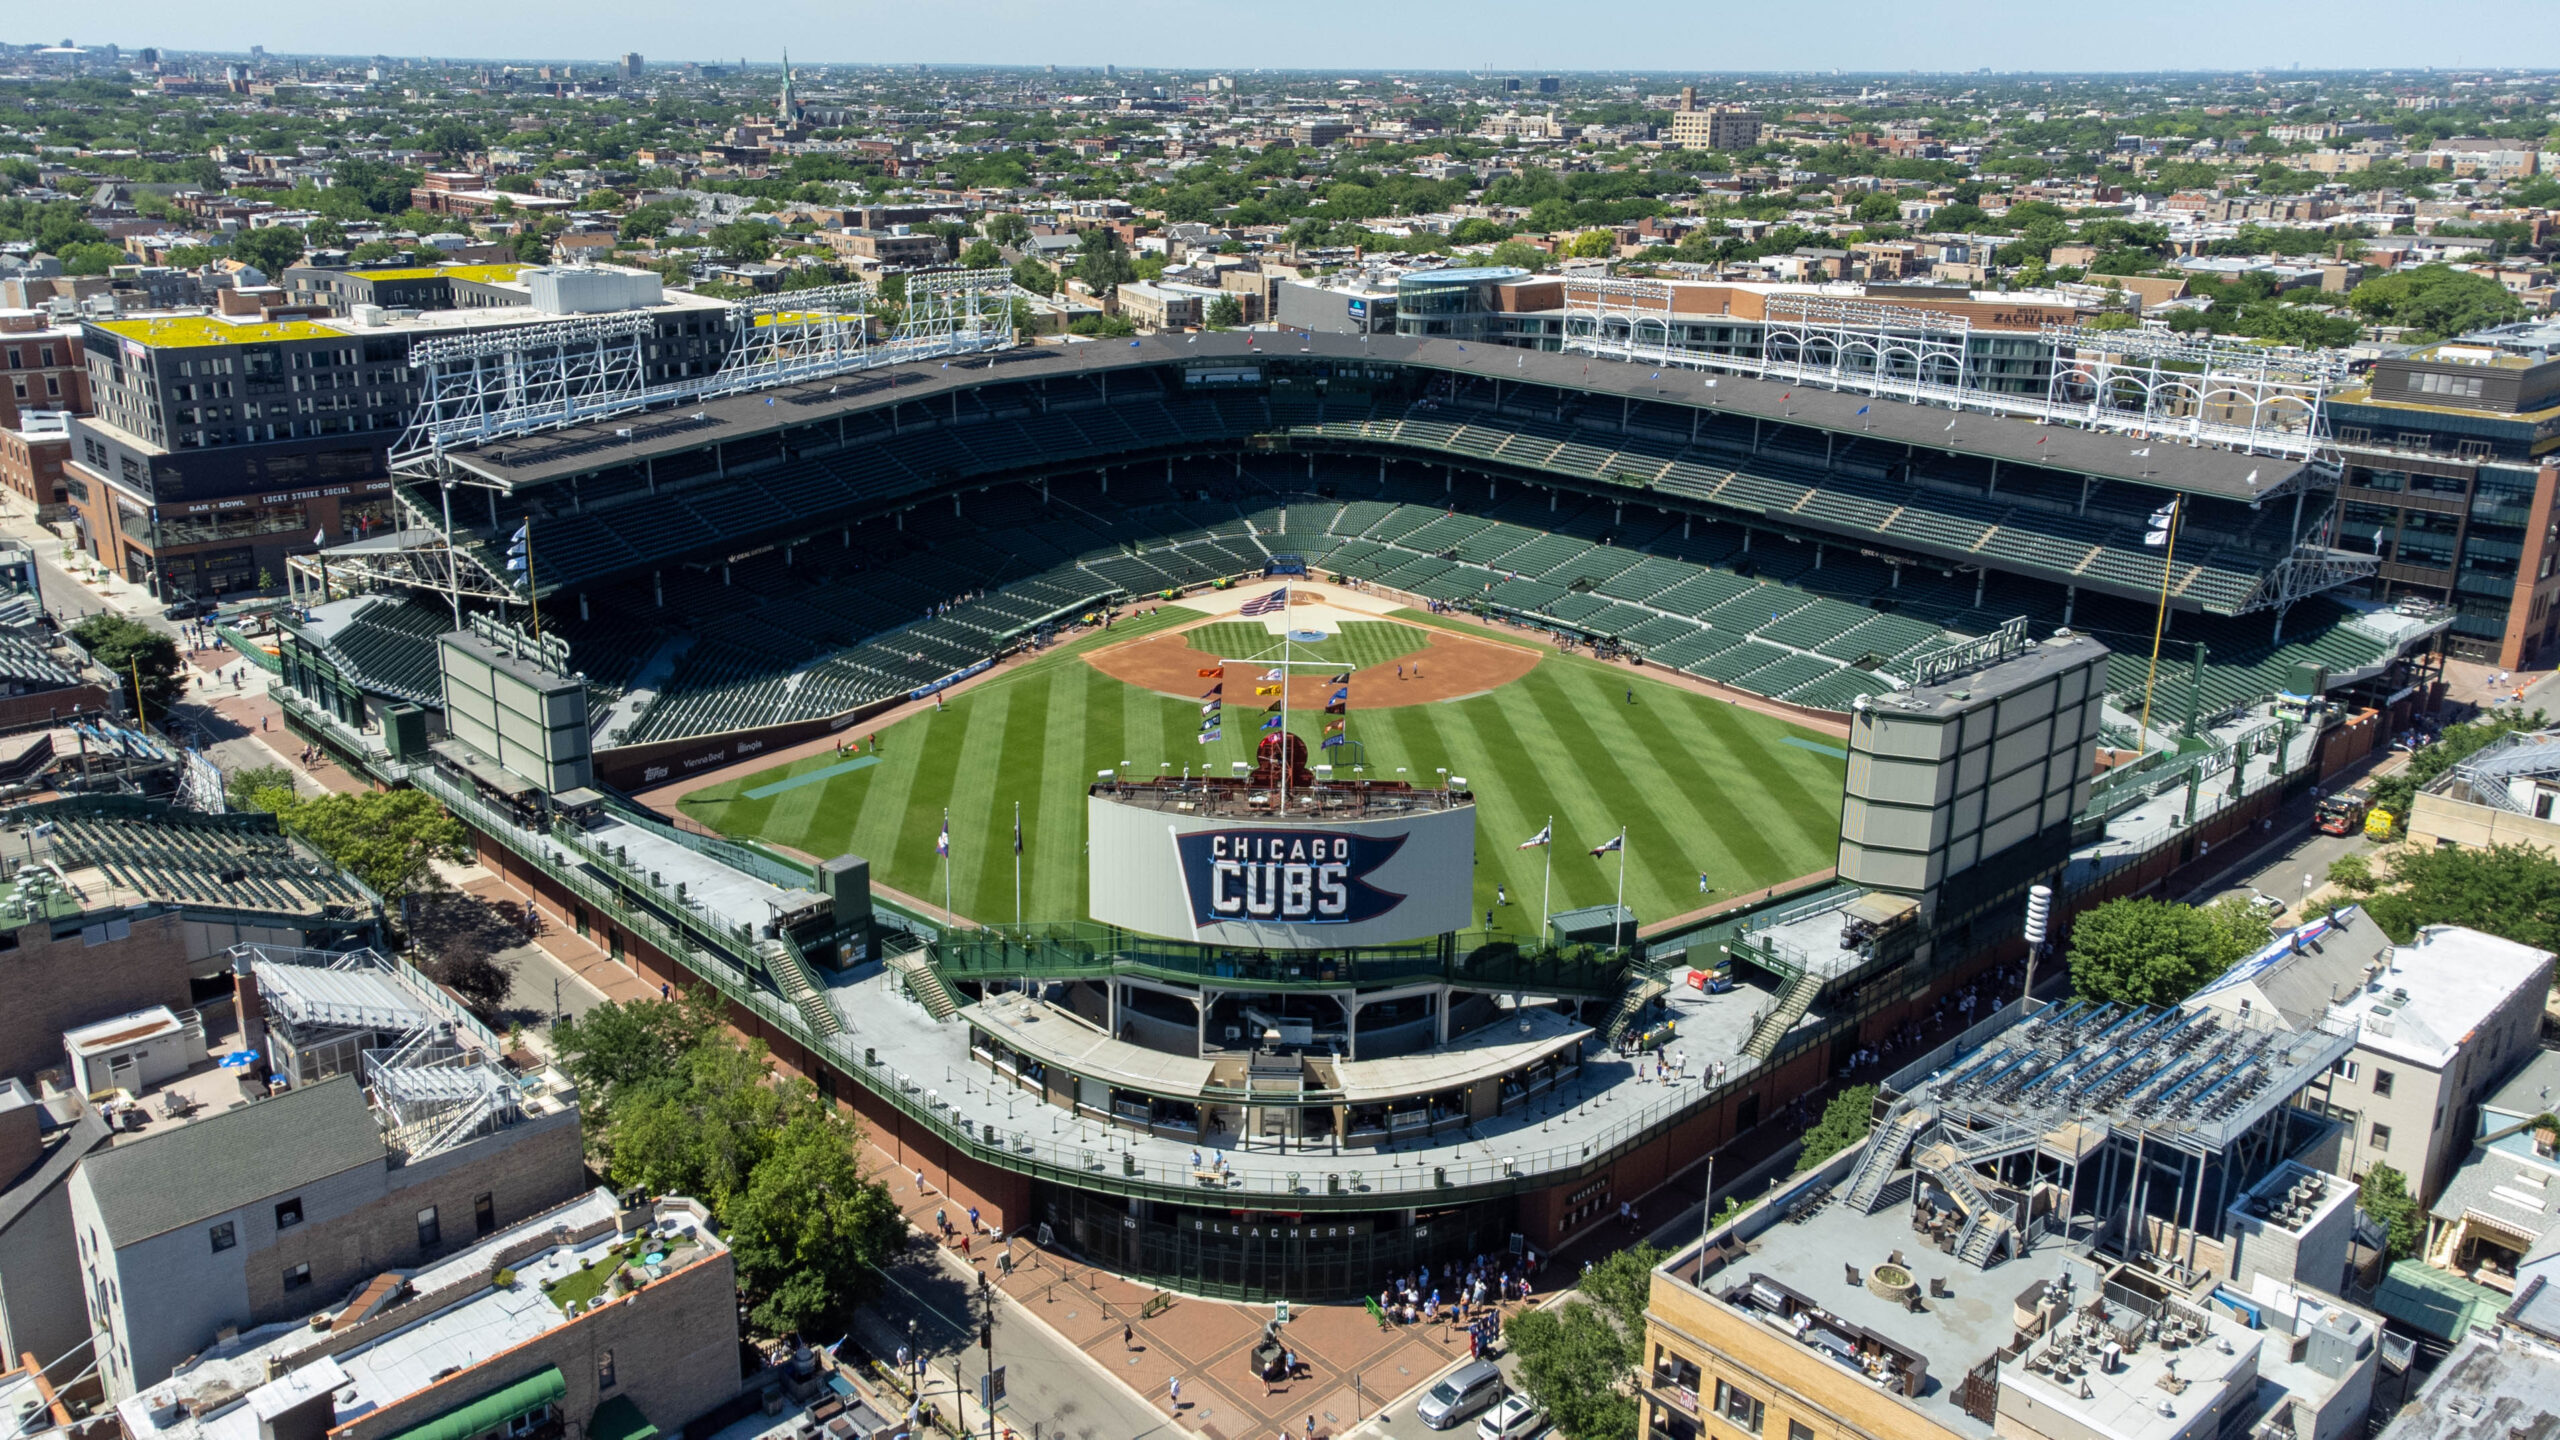 Best And Worst Seats At Wrigley Field A Quick Guide For Fans The Stadiums